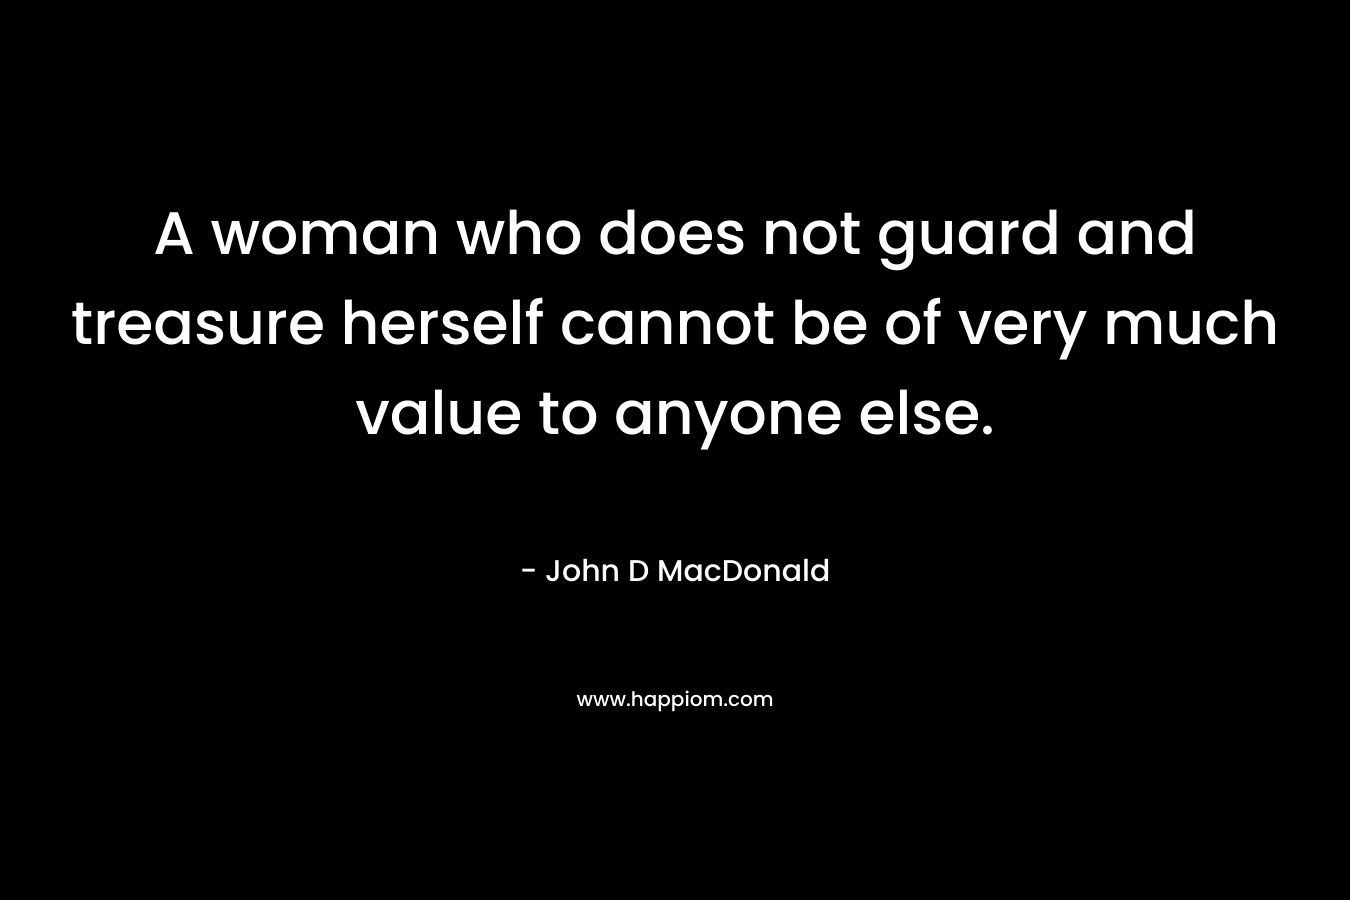 A woman who does not guard and treasure herself cannot be of very much value to anyone else. – John D MacDonald